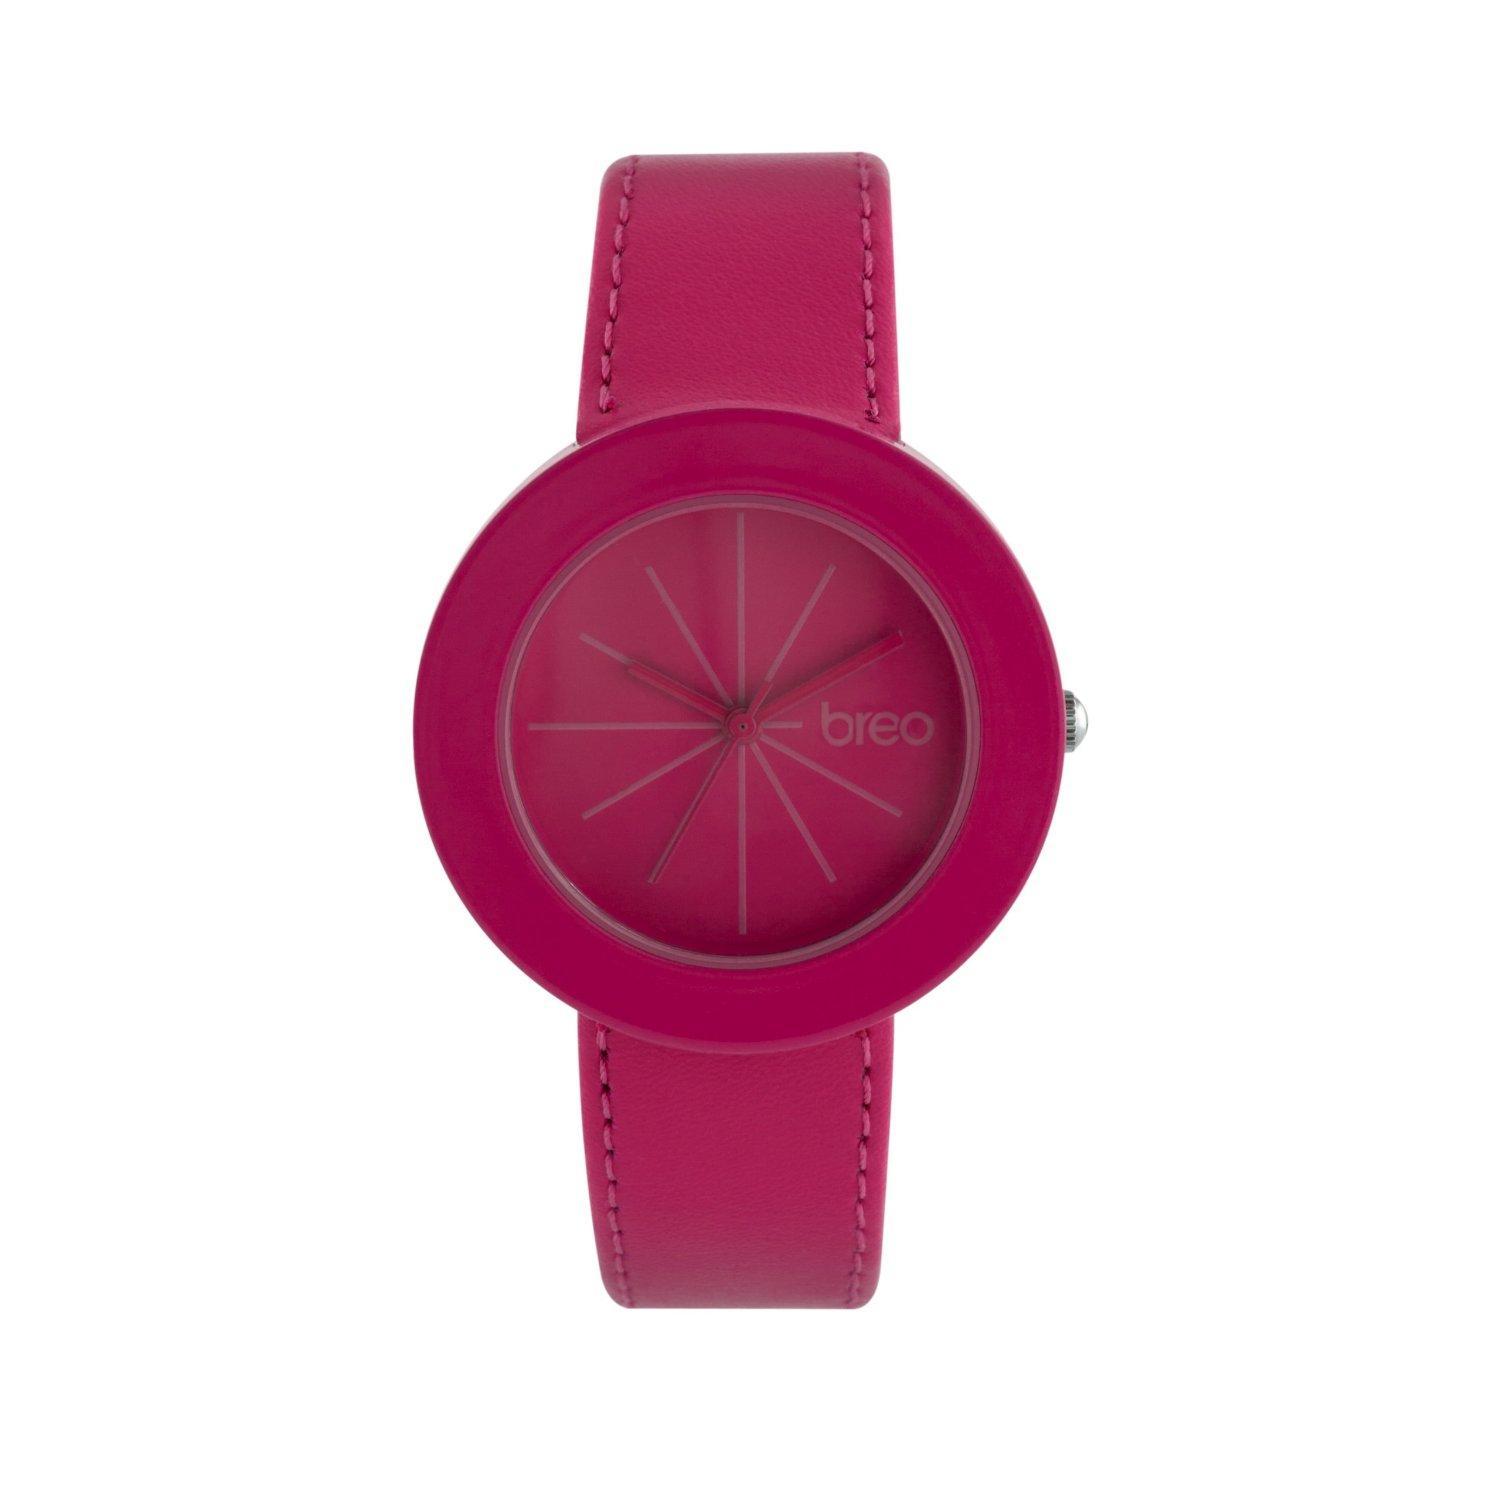 Foto Breo Lima LM3 Unisex Watch Pink Leather Strap & Dial